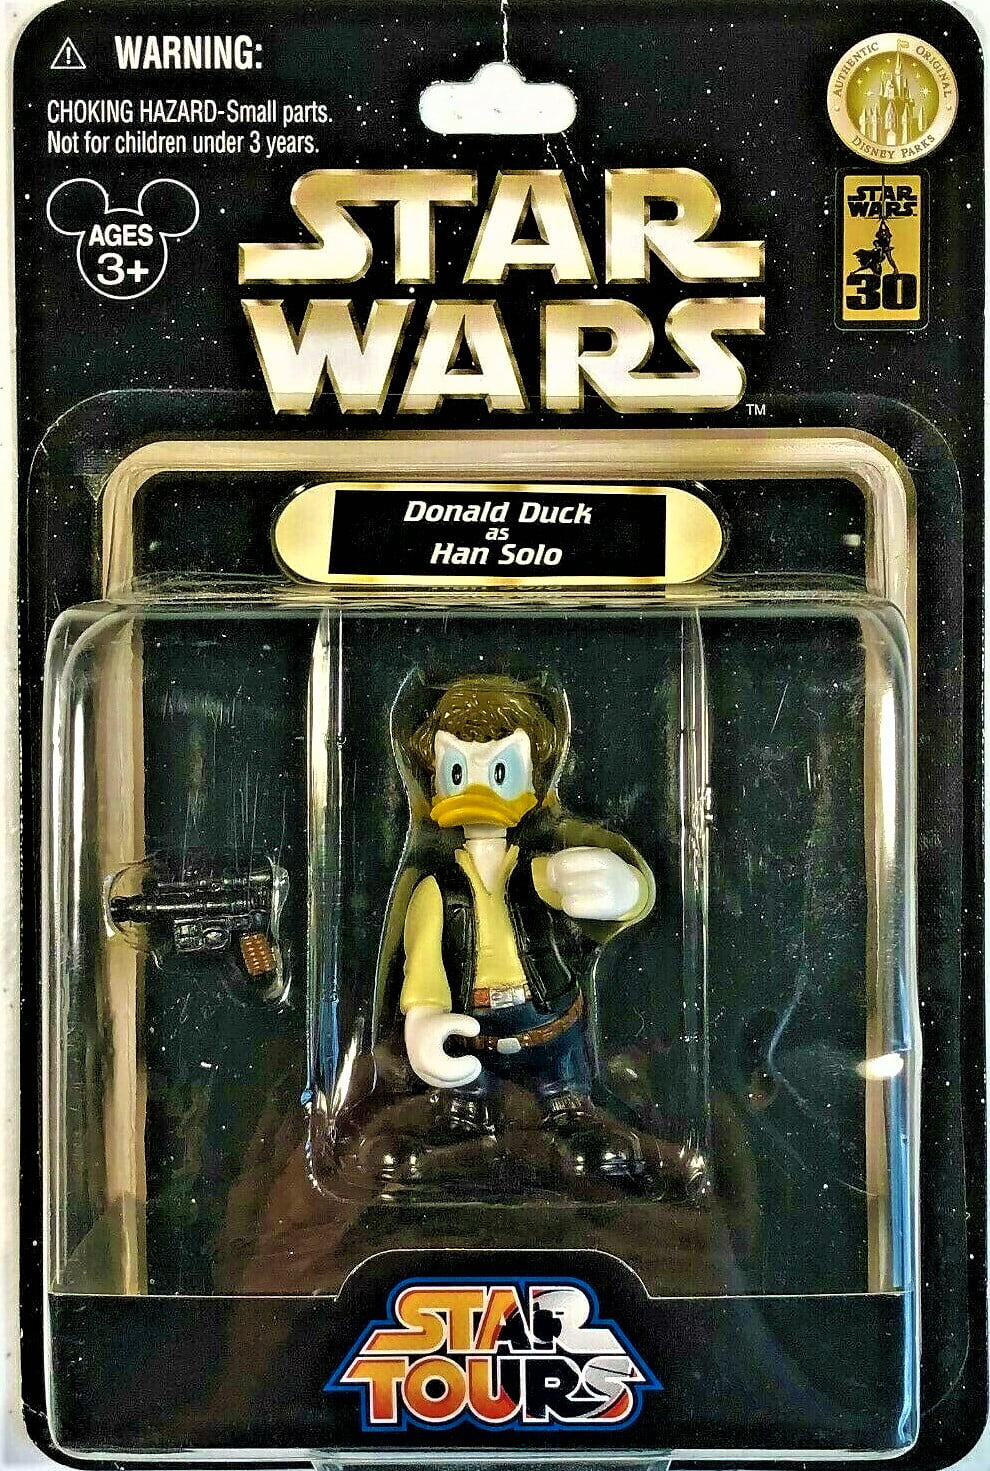 STAR WARS STAR TOURS DONALD DUCK AS HAN SOLO DISNEY EXCLUSIVE NEW IN BOX